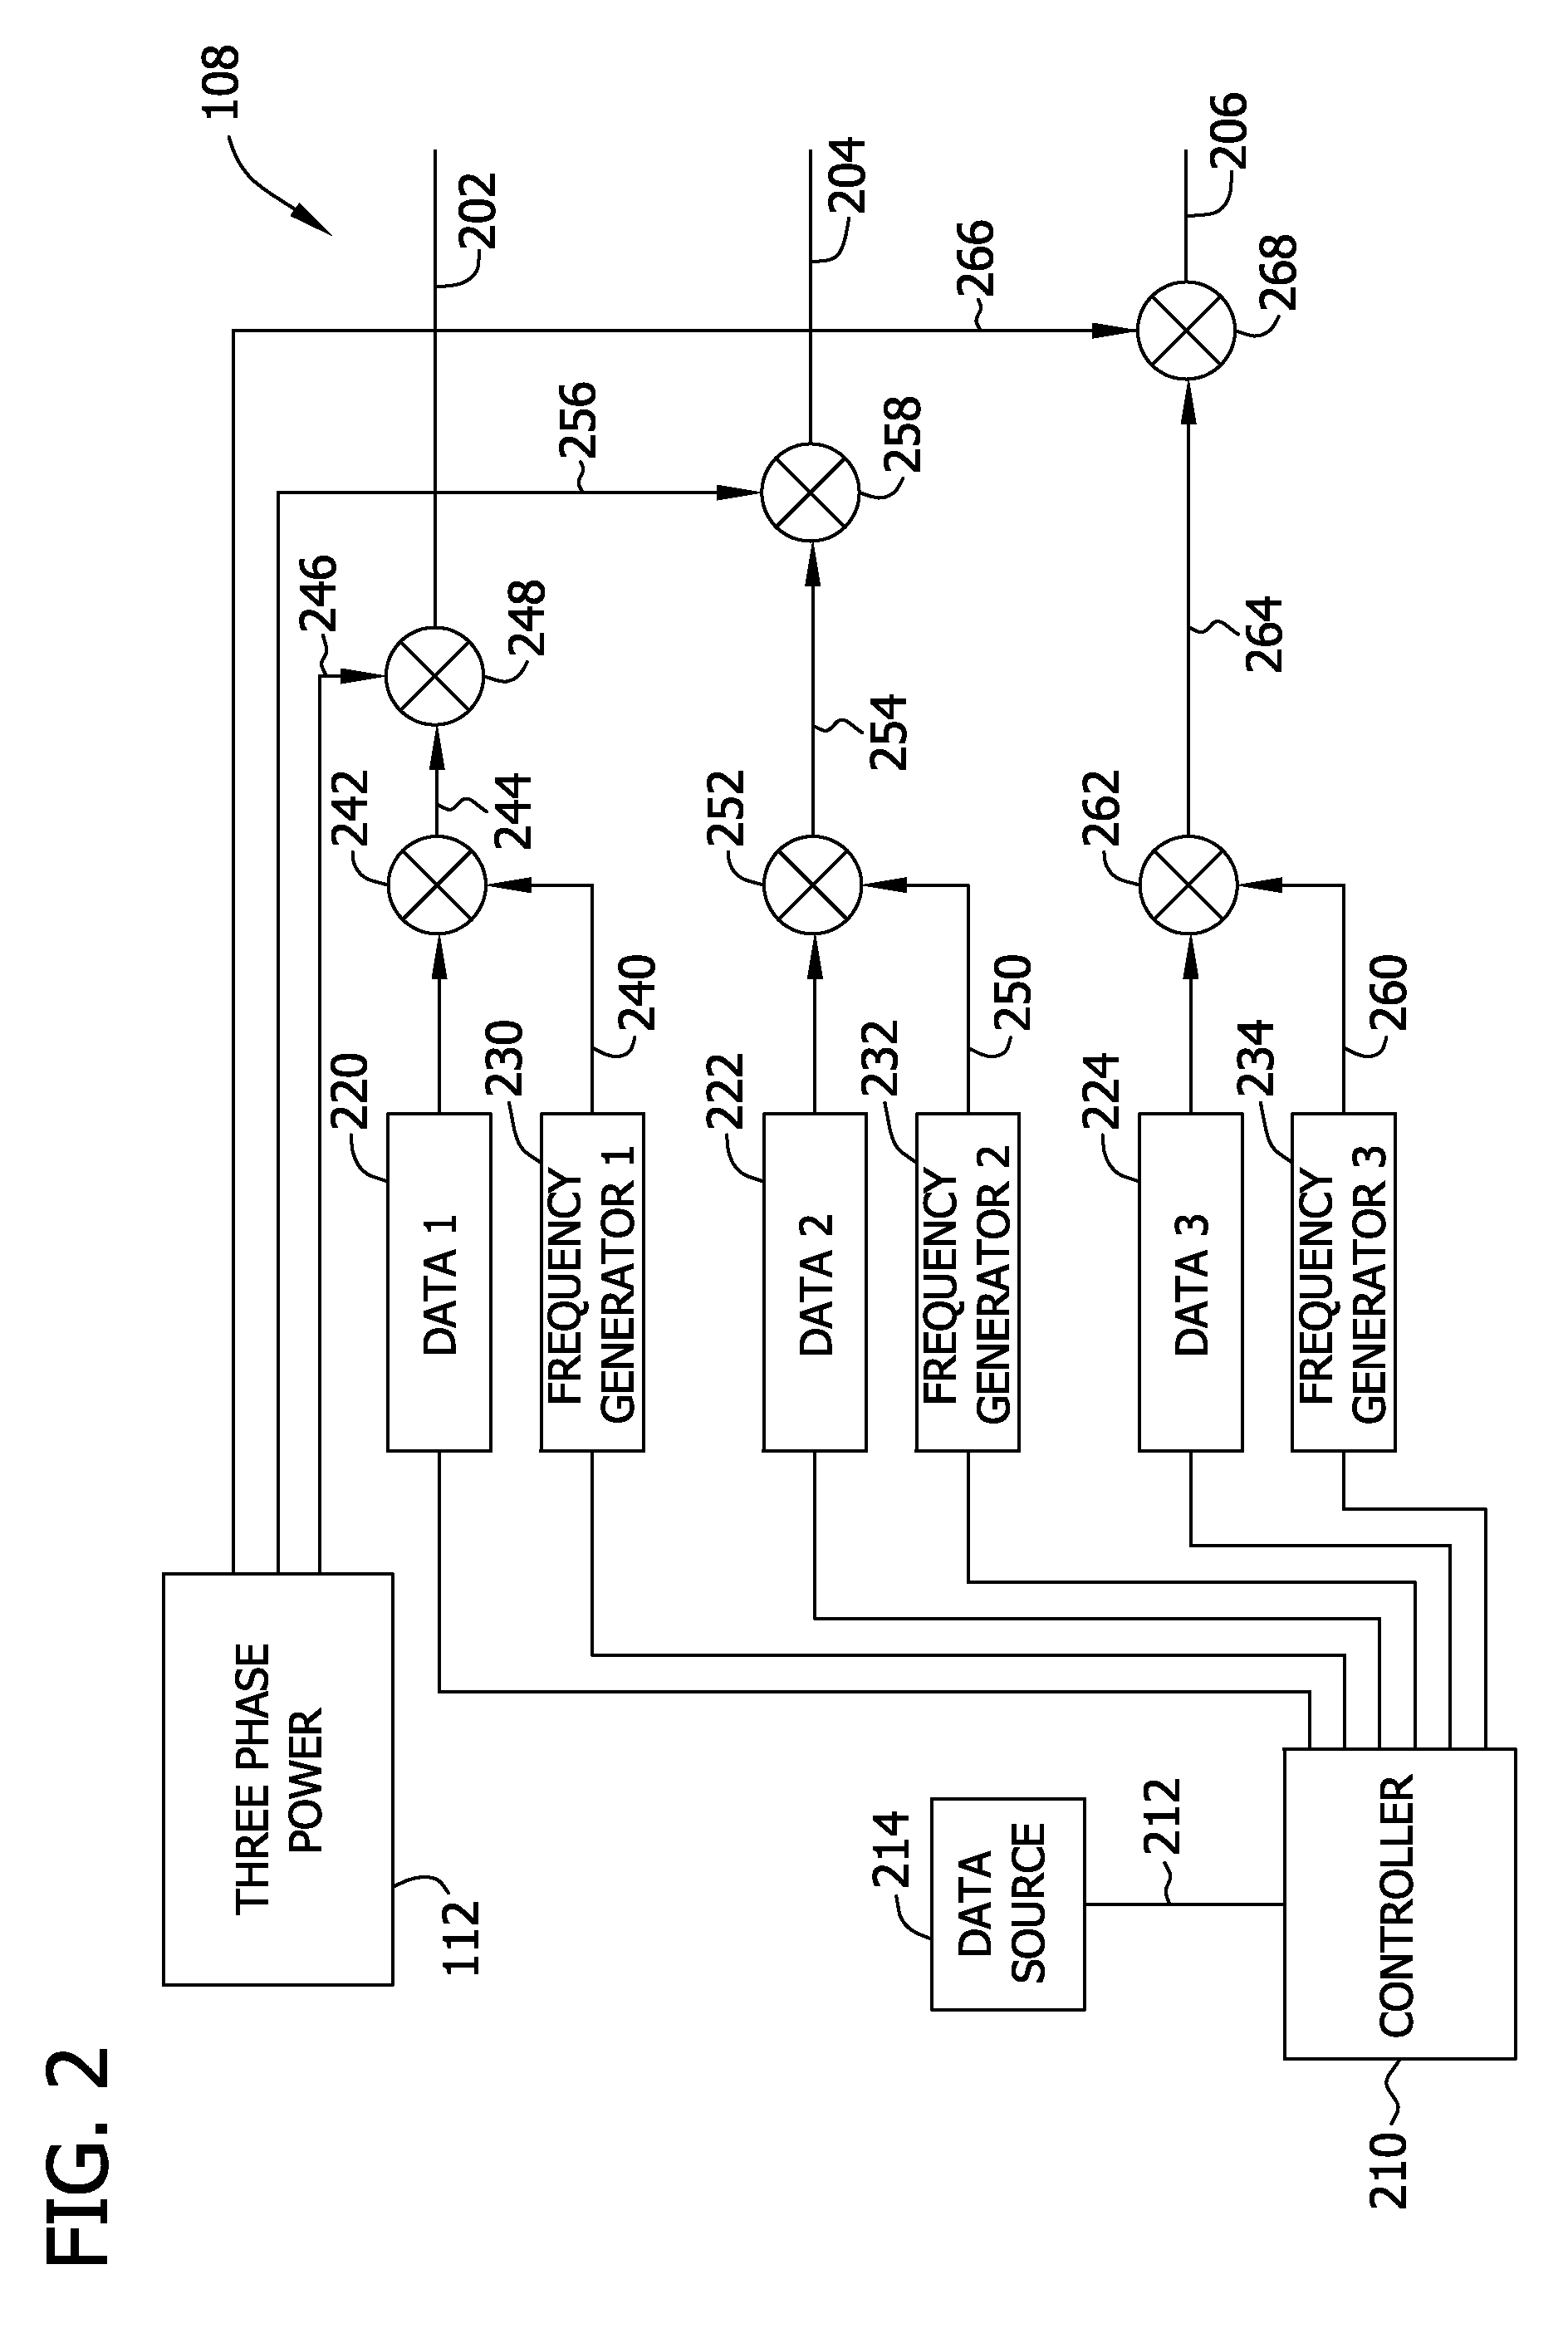 Methods and system for increasing data transmission rates across a three-phase power system